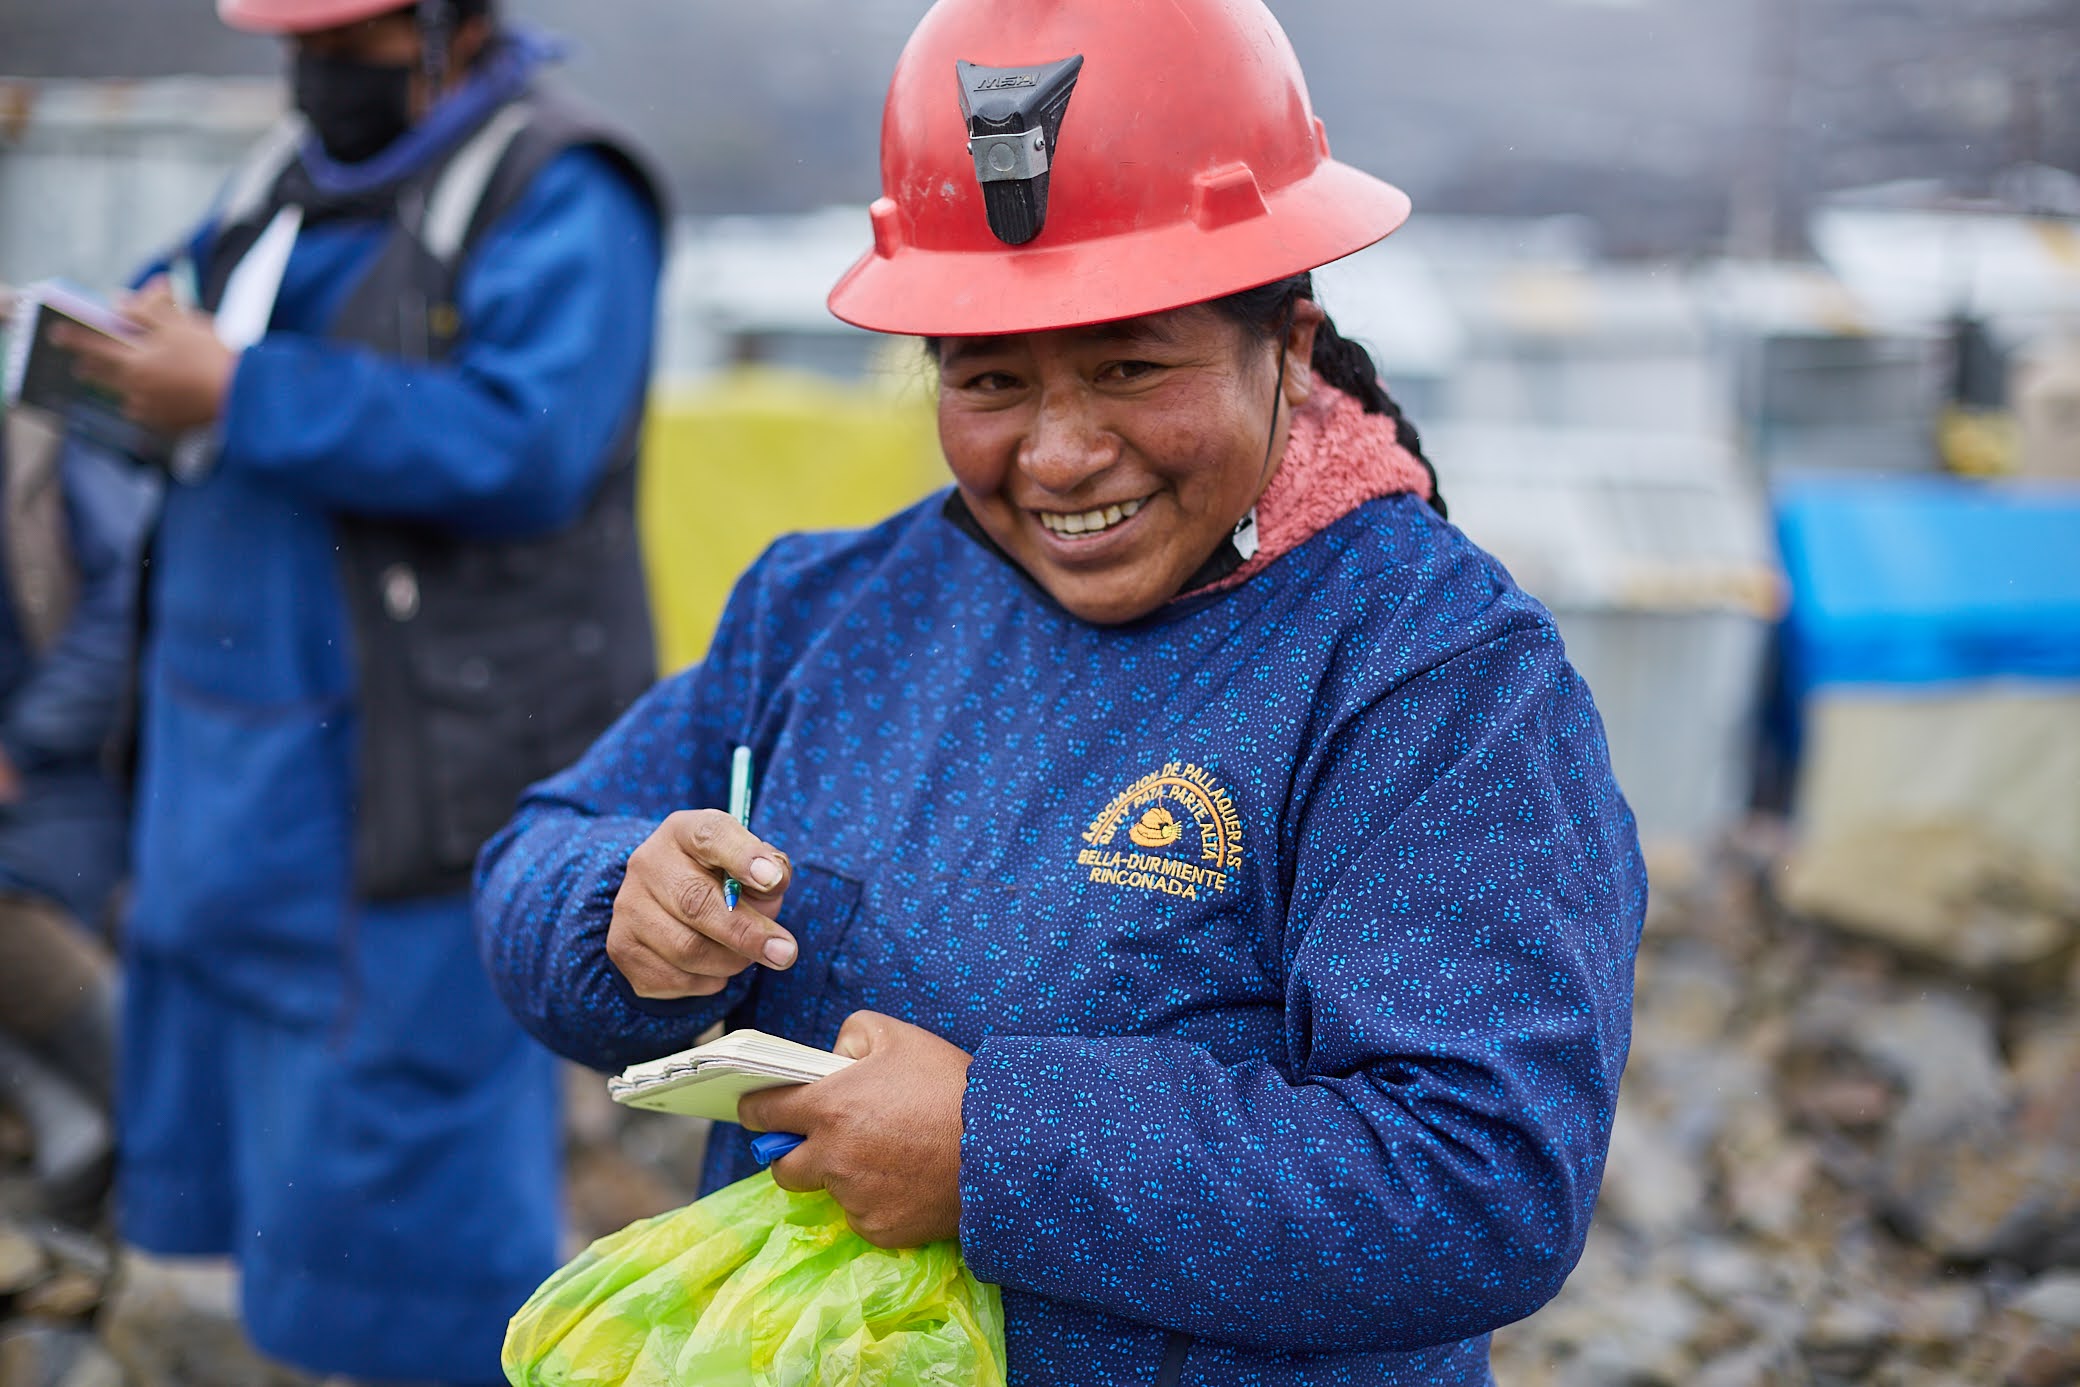 What Are The Challenges Faced By Women In The Mining Workforce In Peru?